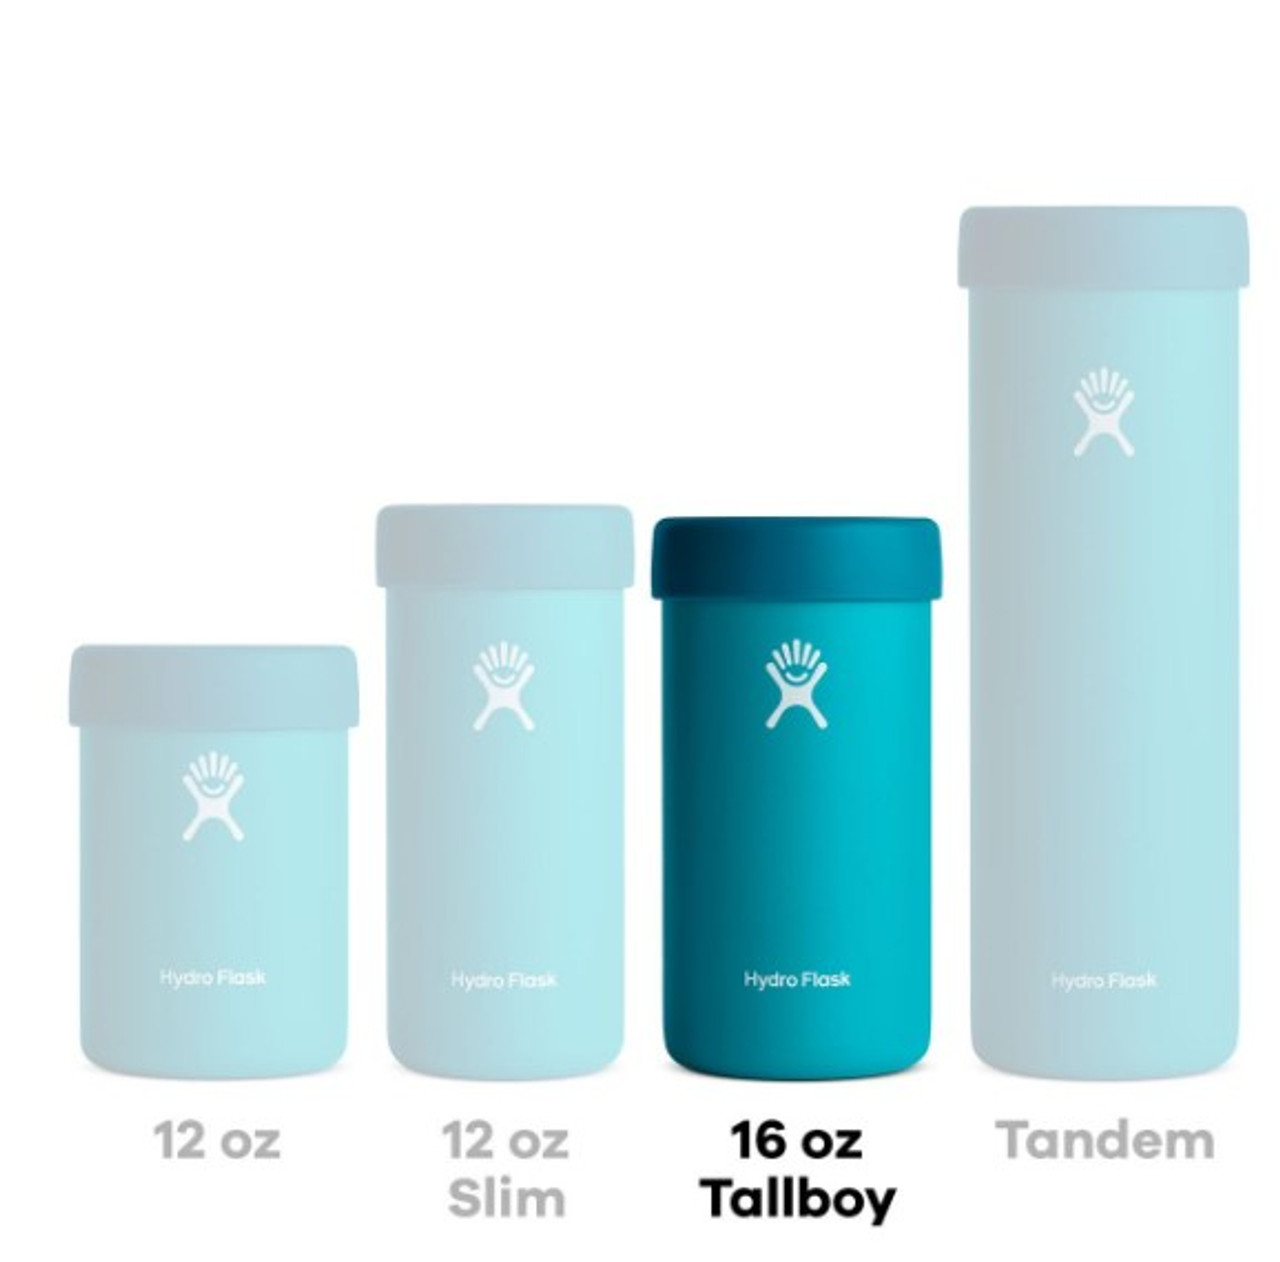 https://cdn11.bigcommerce.com/s-s7ib93jl4n/images/stencil/1280x1280/products/49663/65556/Hydro-flask-16oz-Tallboy-Cooler-Cup-size__51204.1658510938.jpg?c=2?imbypass=on